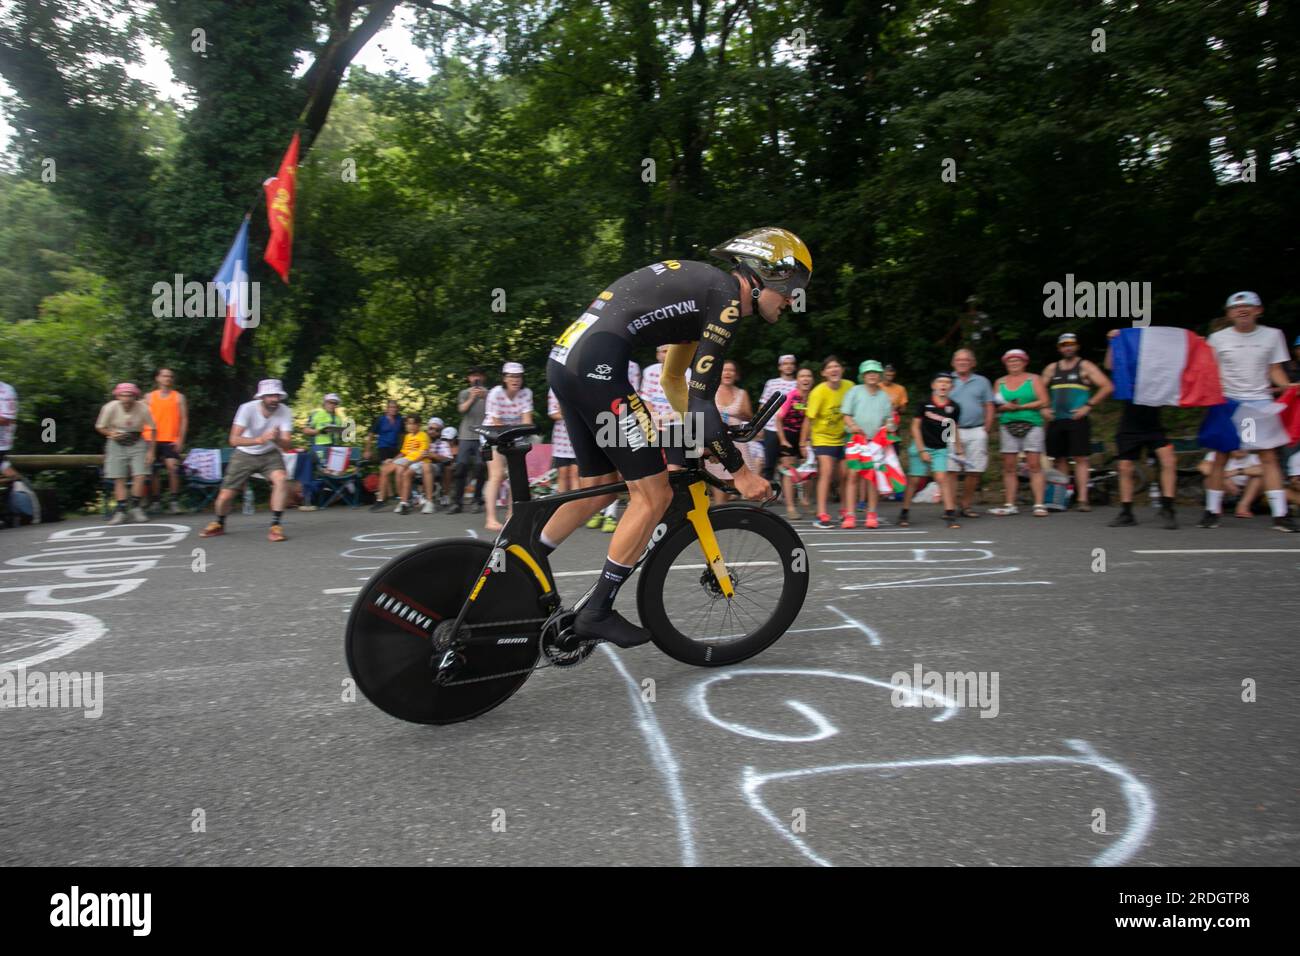 TIESJ BENOOT (JUMBO-VISMA NED) in the time trial stage at Tour de France. Stock Photo